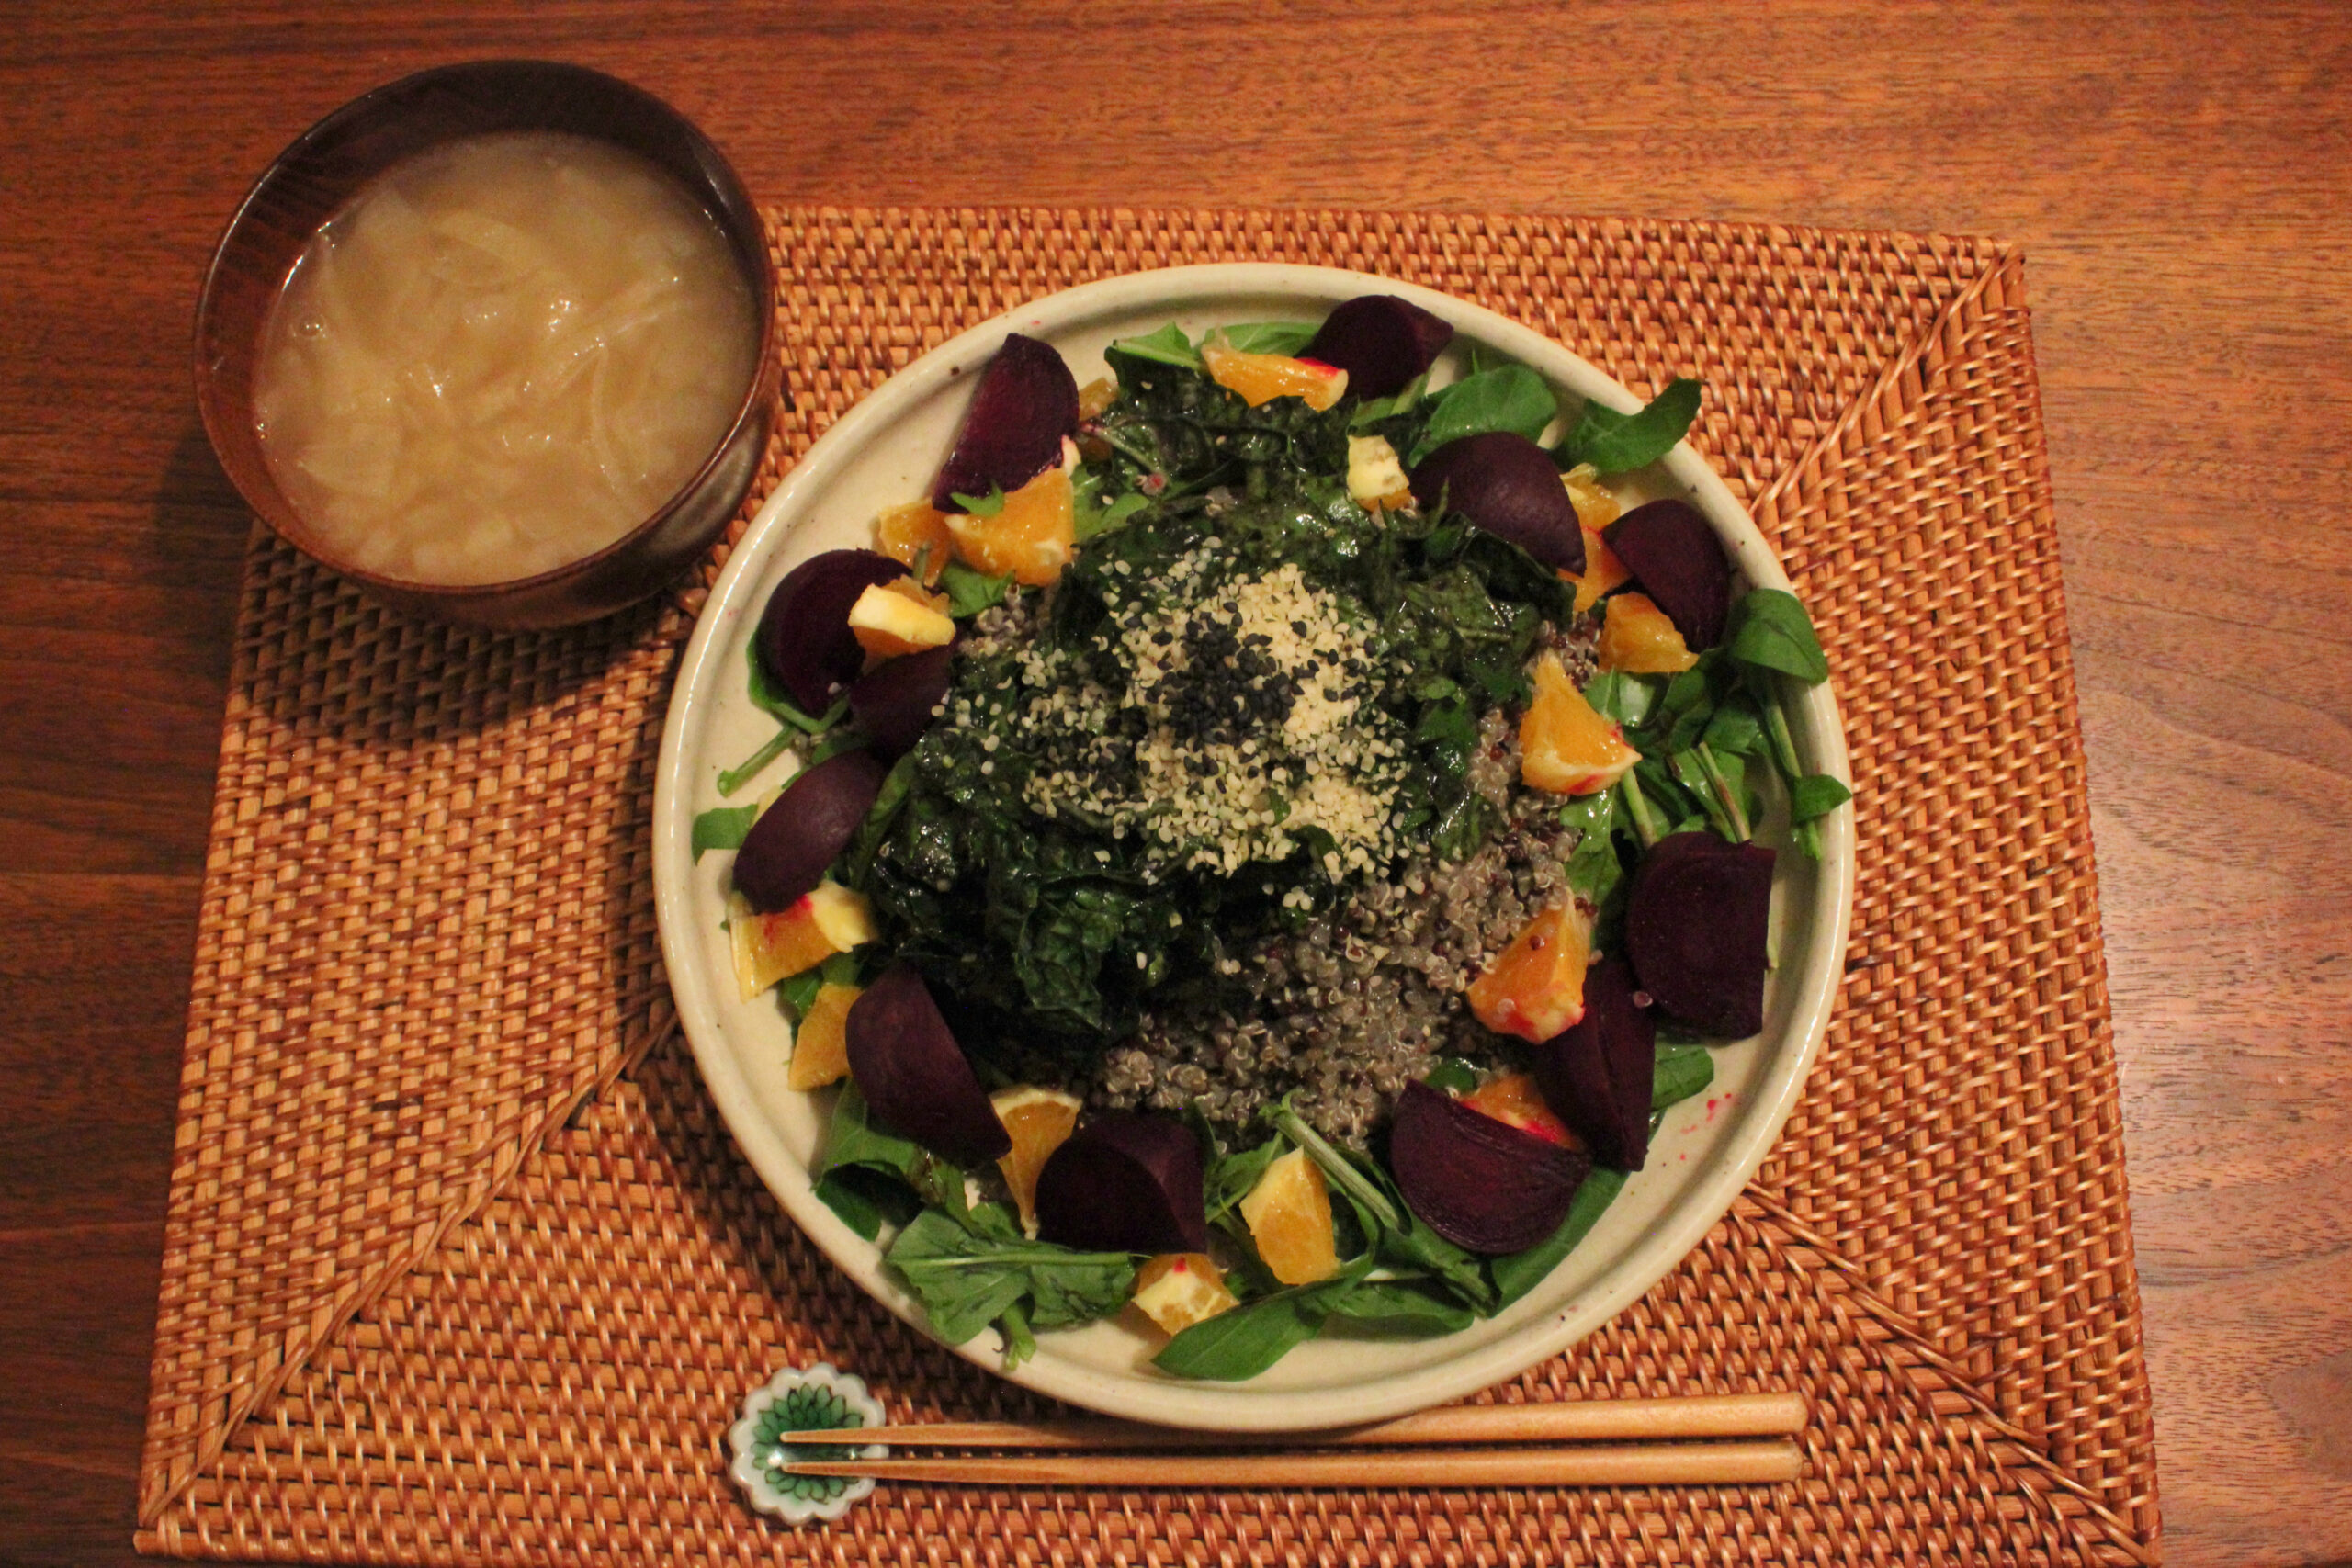 Moon Time Dinner: Quinoa Salad with Steamed  Beets and Kale and Black Sesame Tahini Dressing